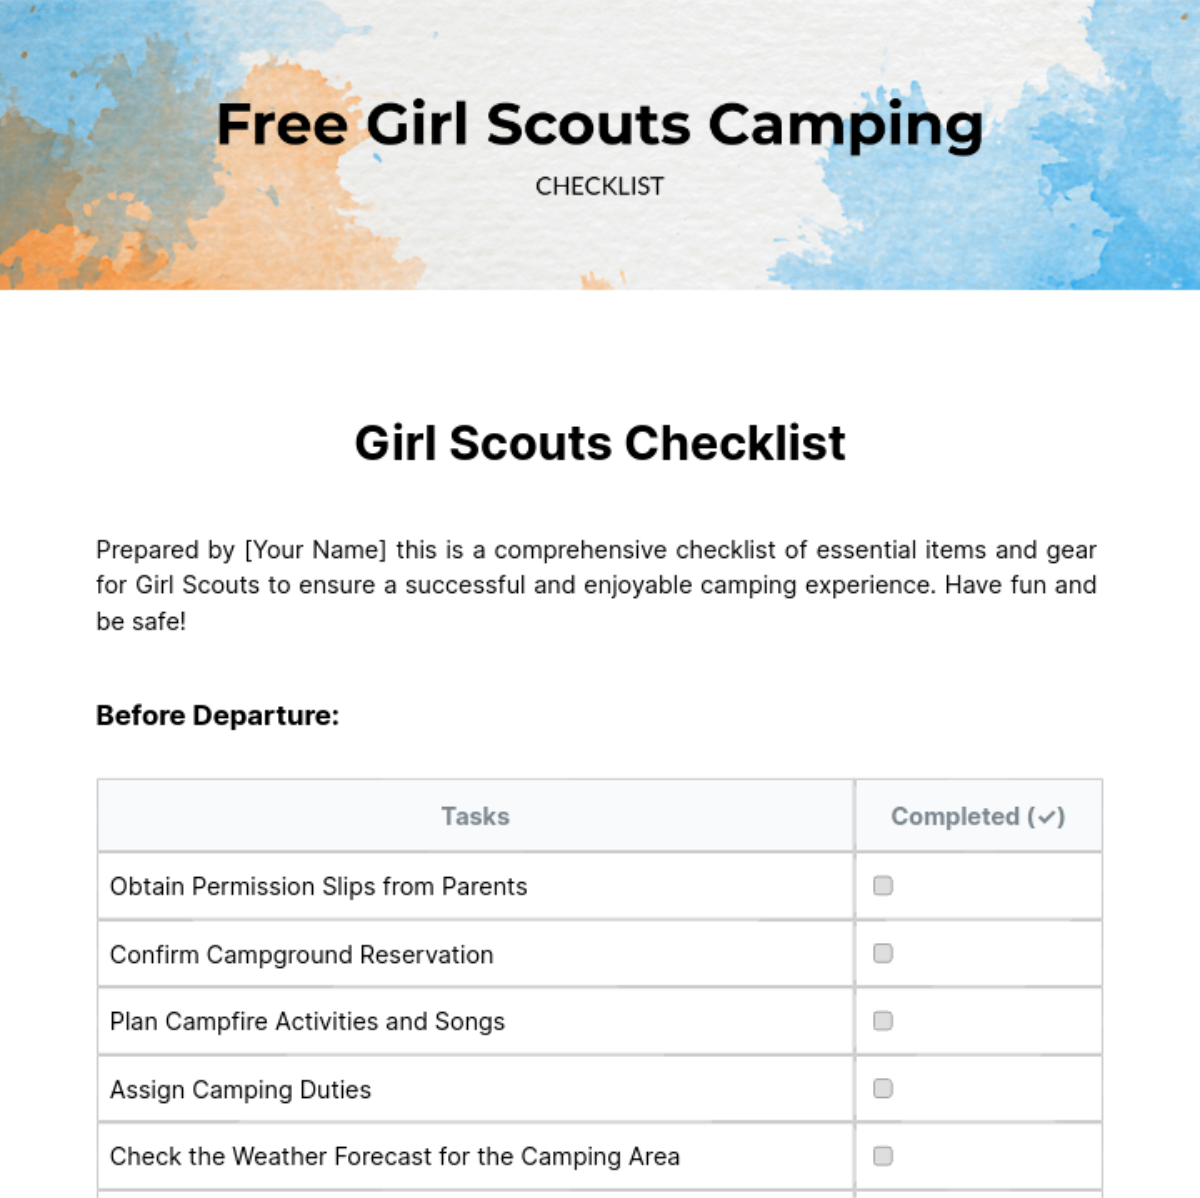 Free Girl Scouts Camping Checklist Template